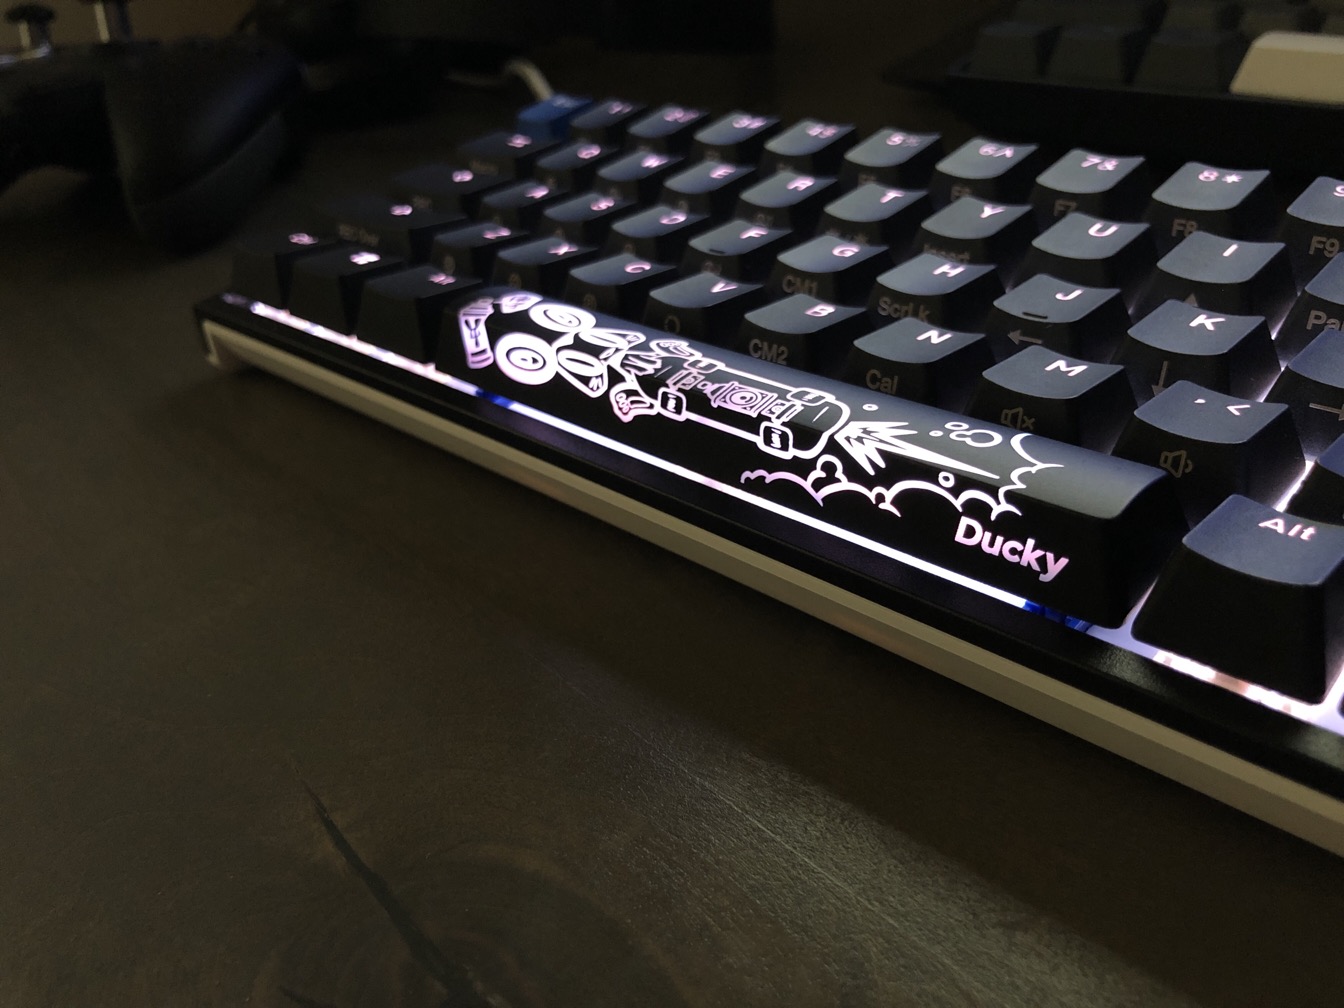 the stylish rat design on the space bar